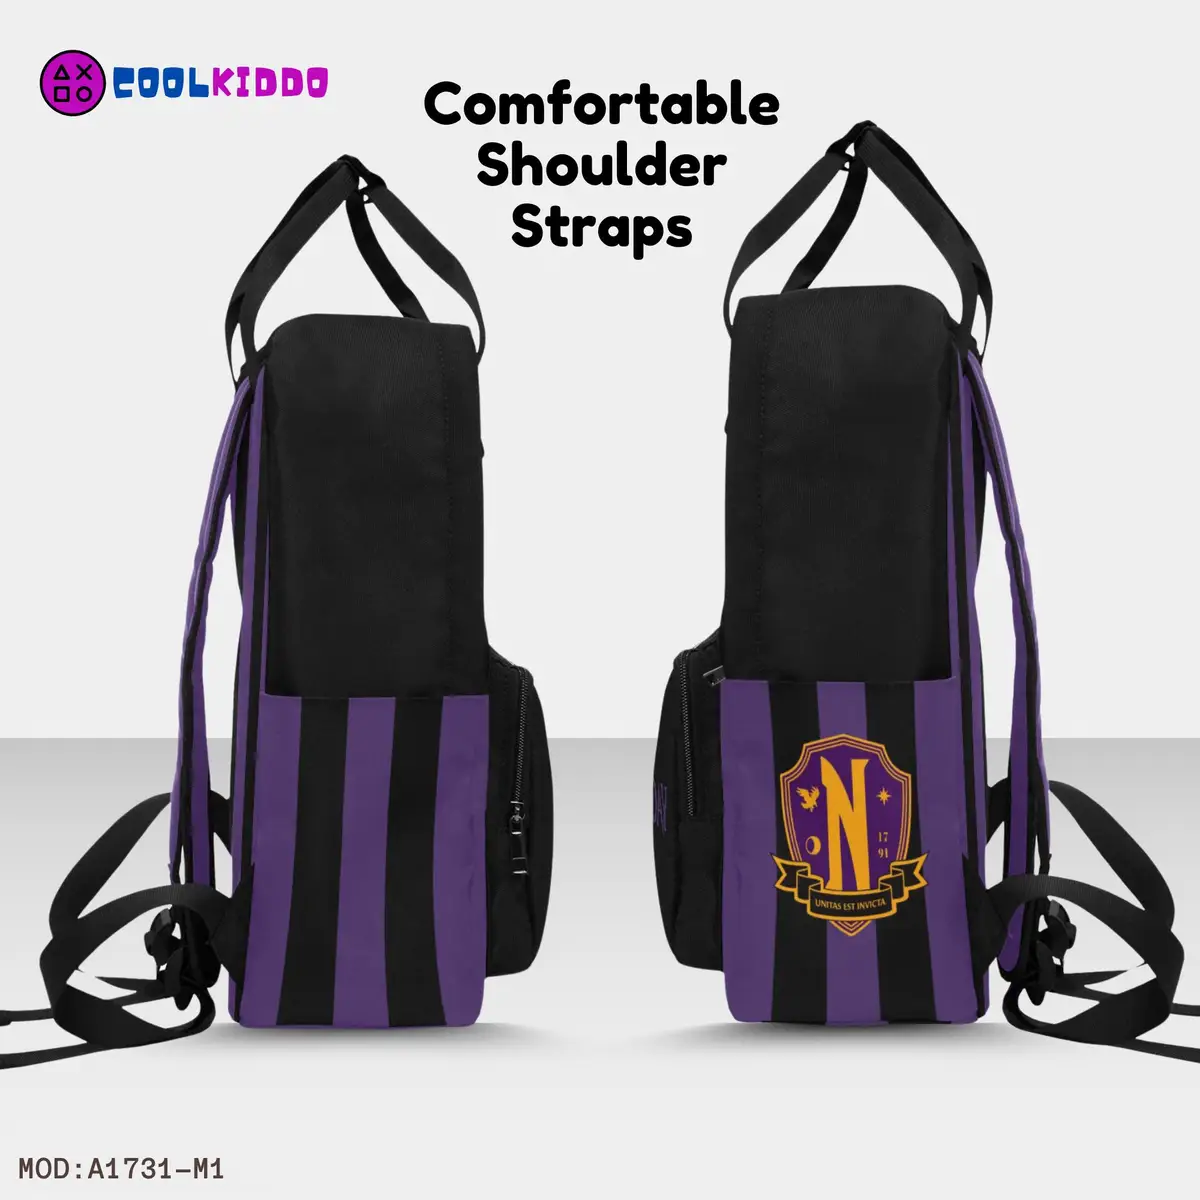 Wednesday Addams Uniform Inspired Black and Purple Backpack, Youth Book Bag for School, Nevermore Academy Rucksack Cool Kiddo 18